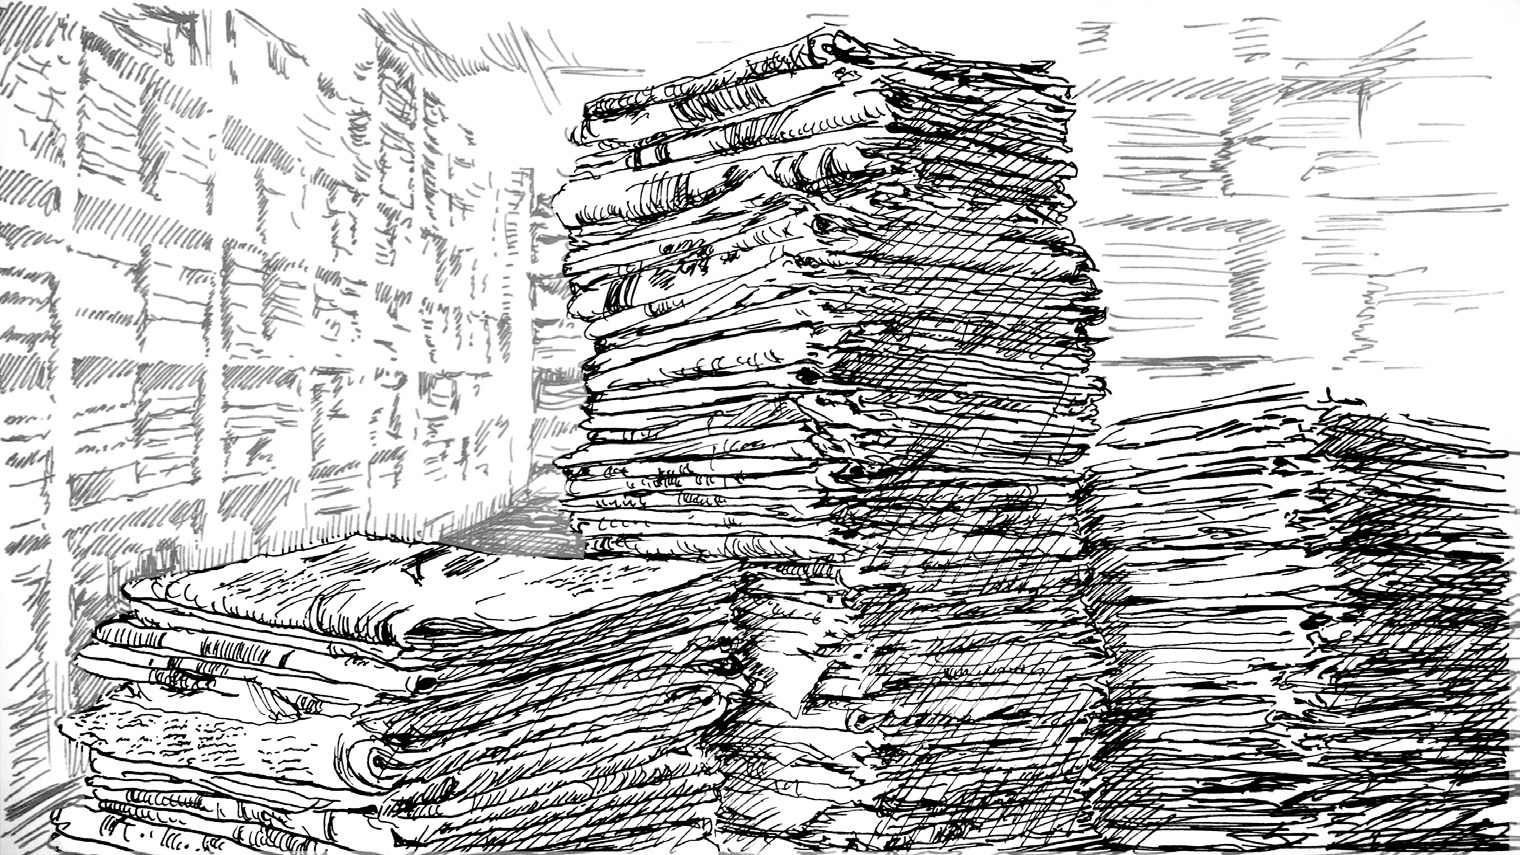 Three newspaper stacks of different heights